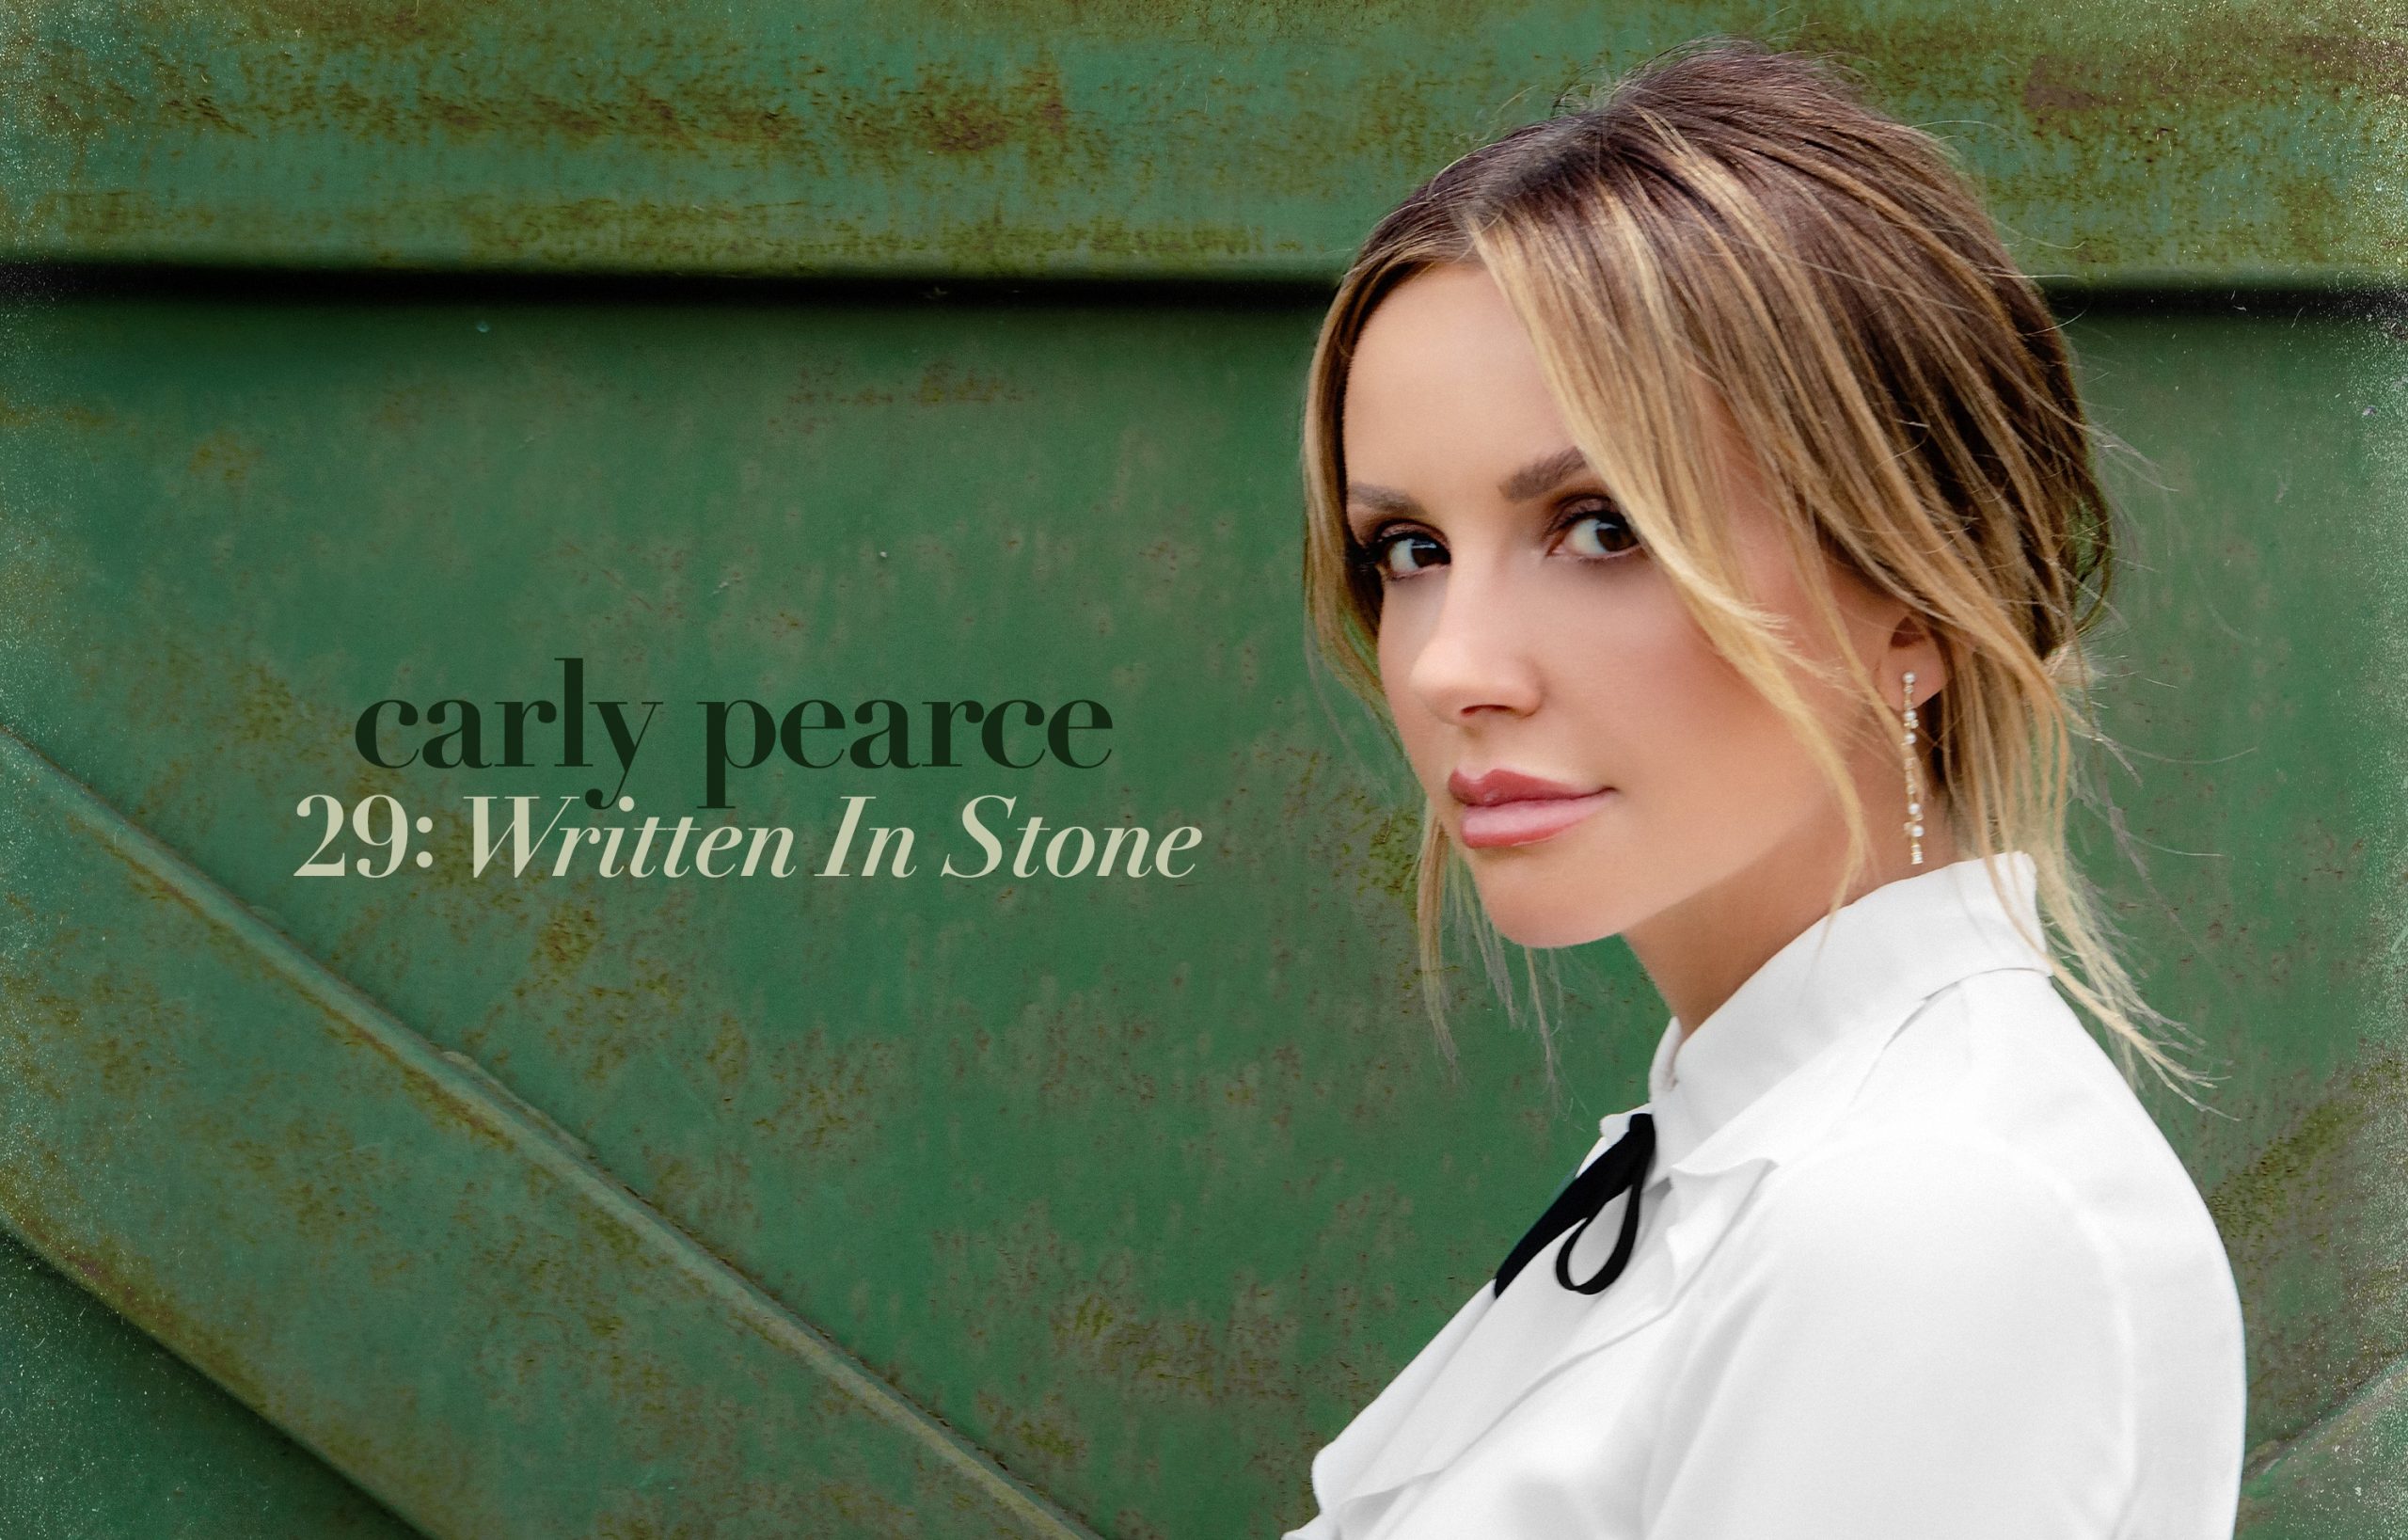 Carly Pearce brings her story to life for her audience with the beautiful n...